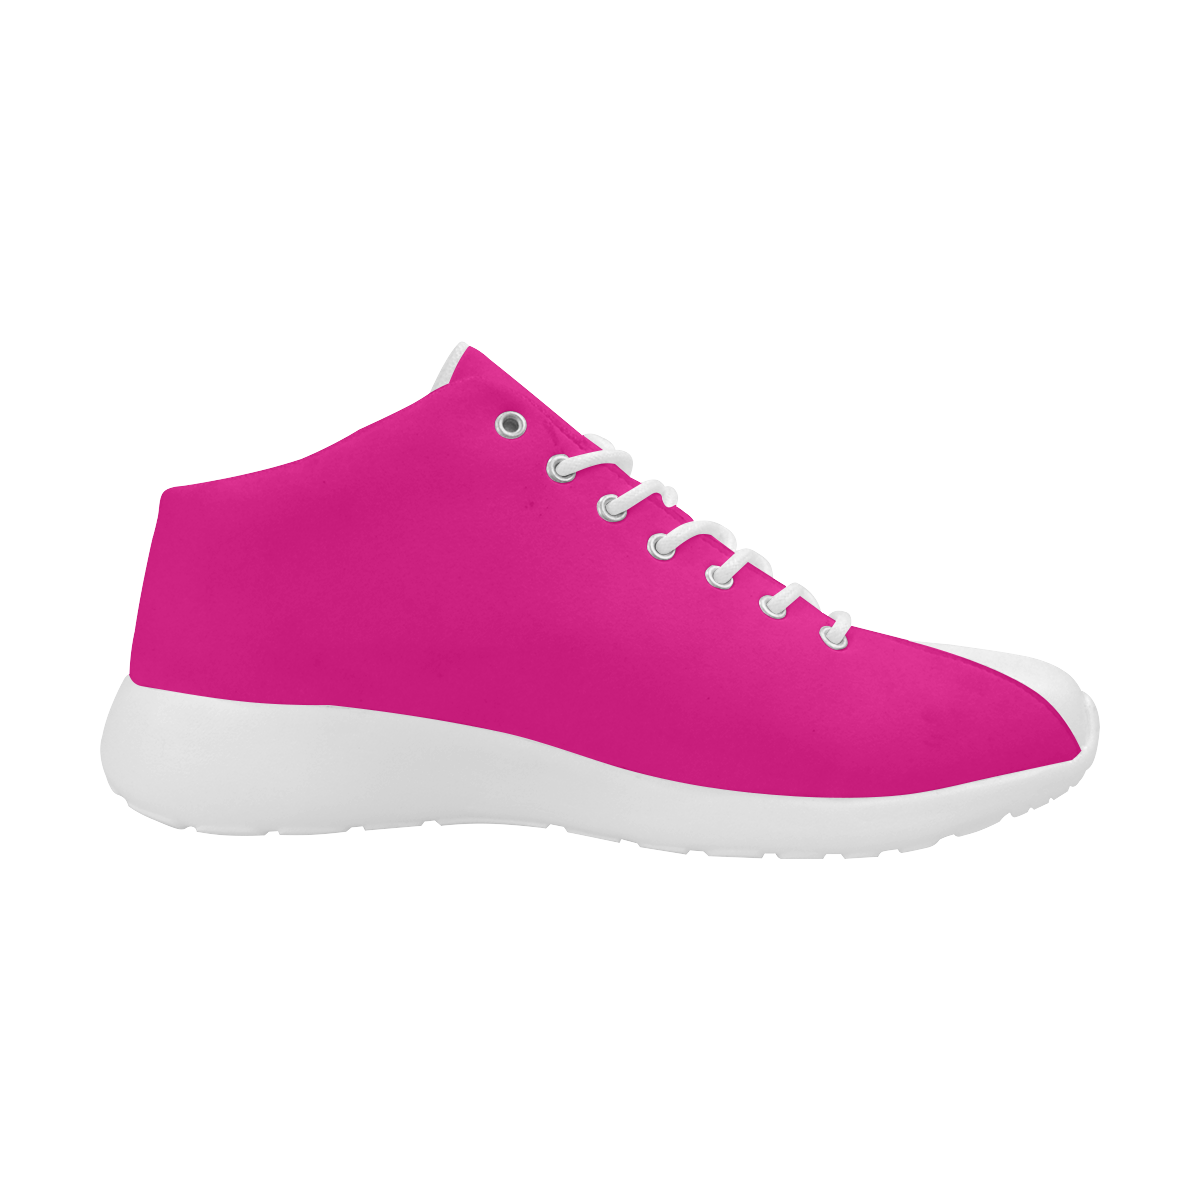 Hot Pink Happiness Men's Basketball Training Shoes (Model 47502)